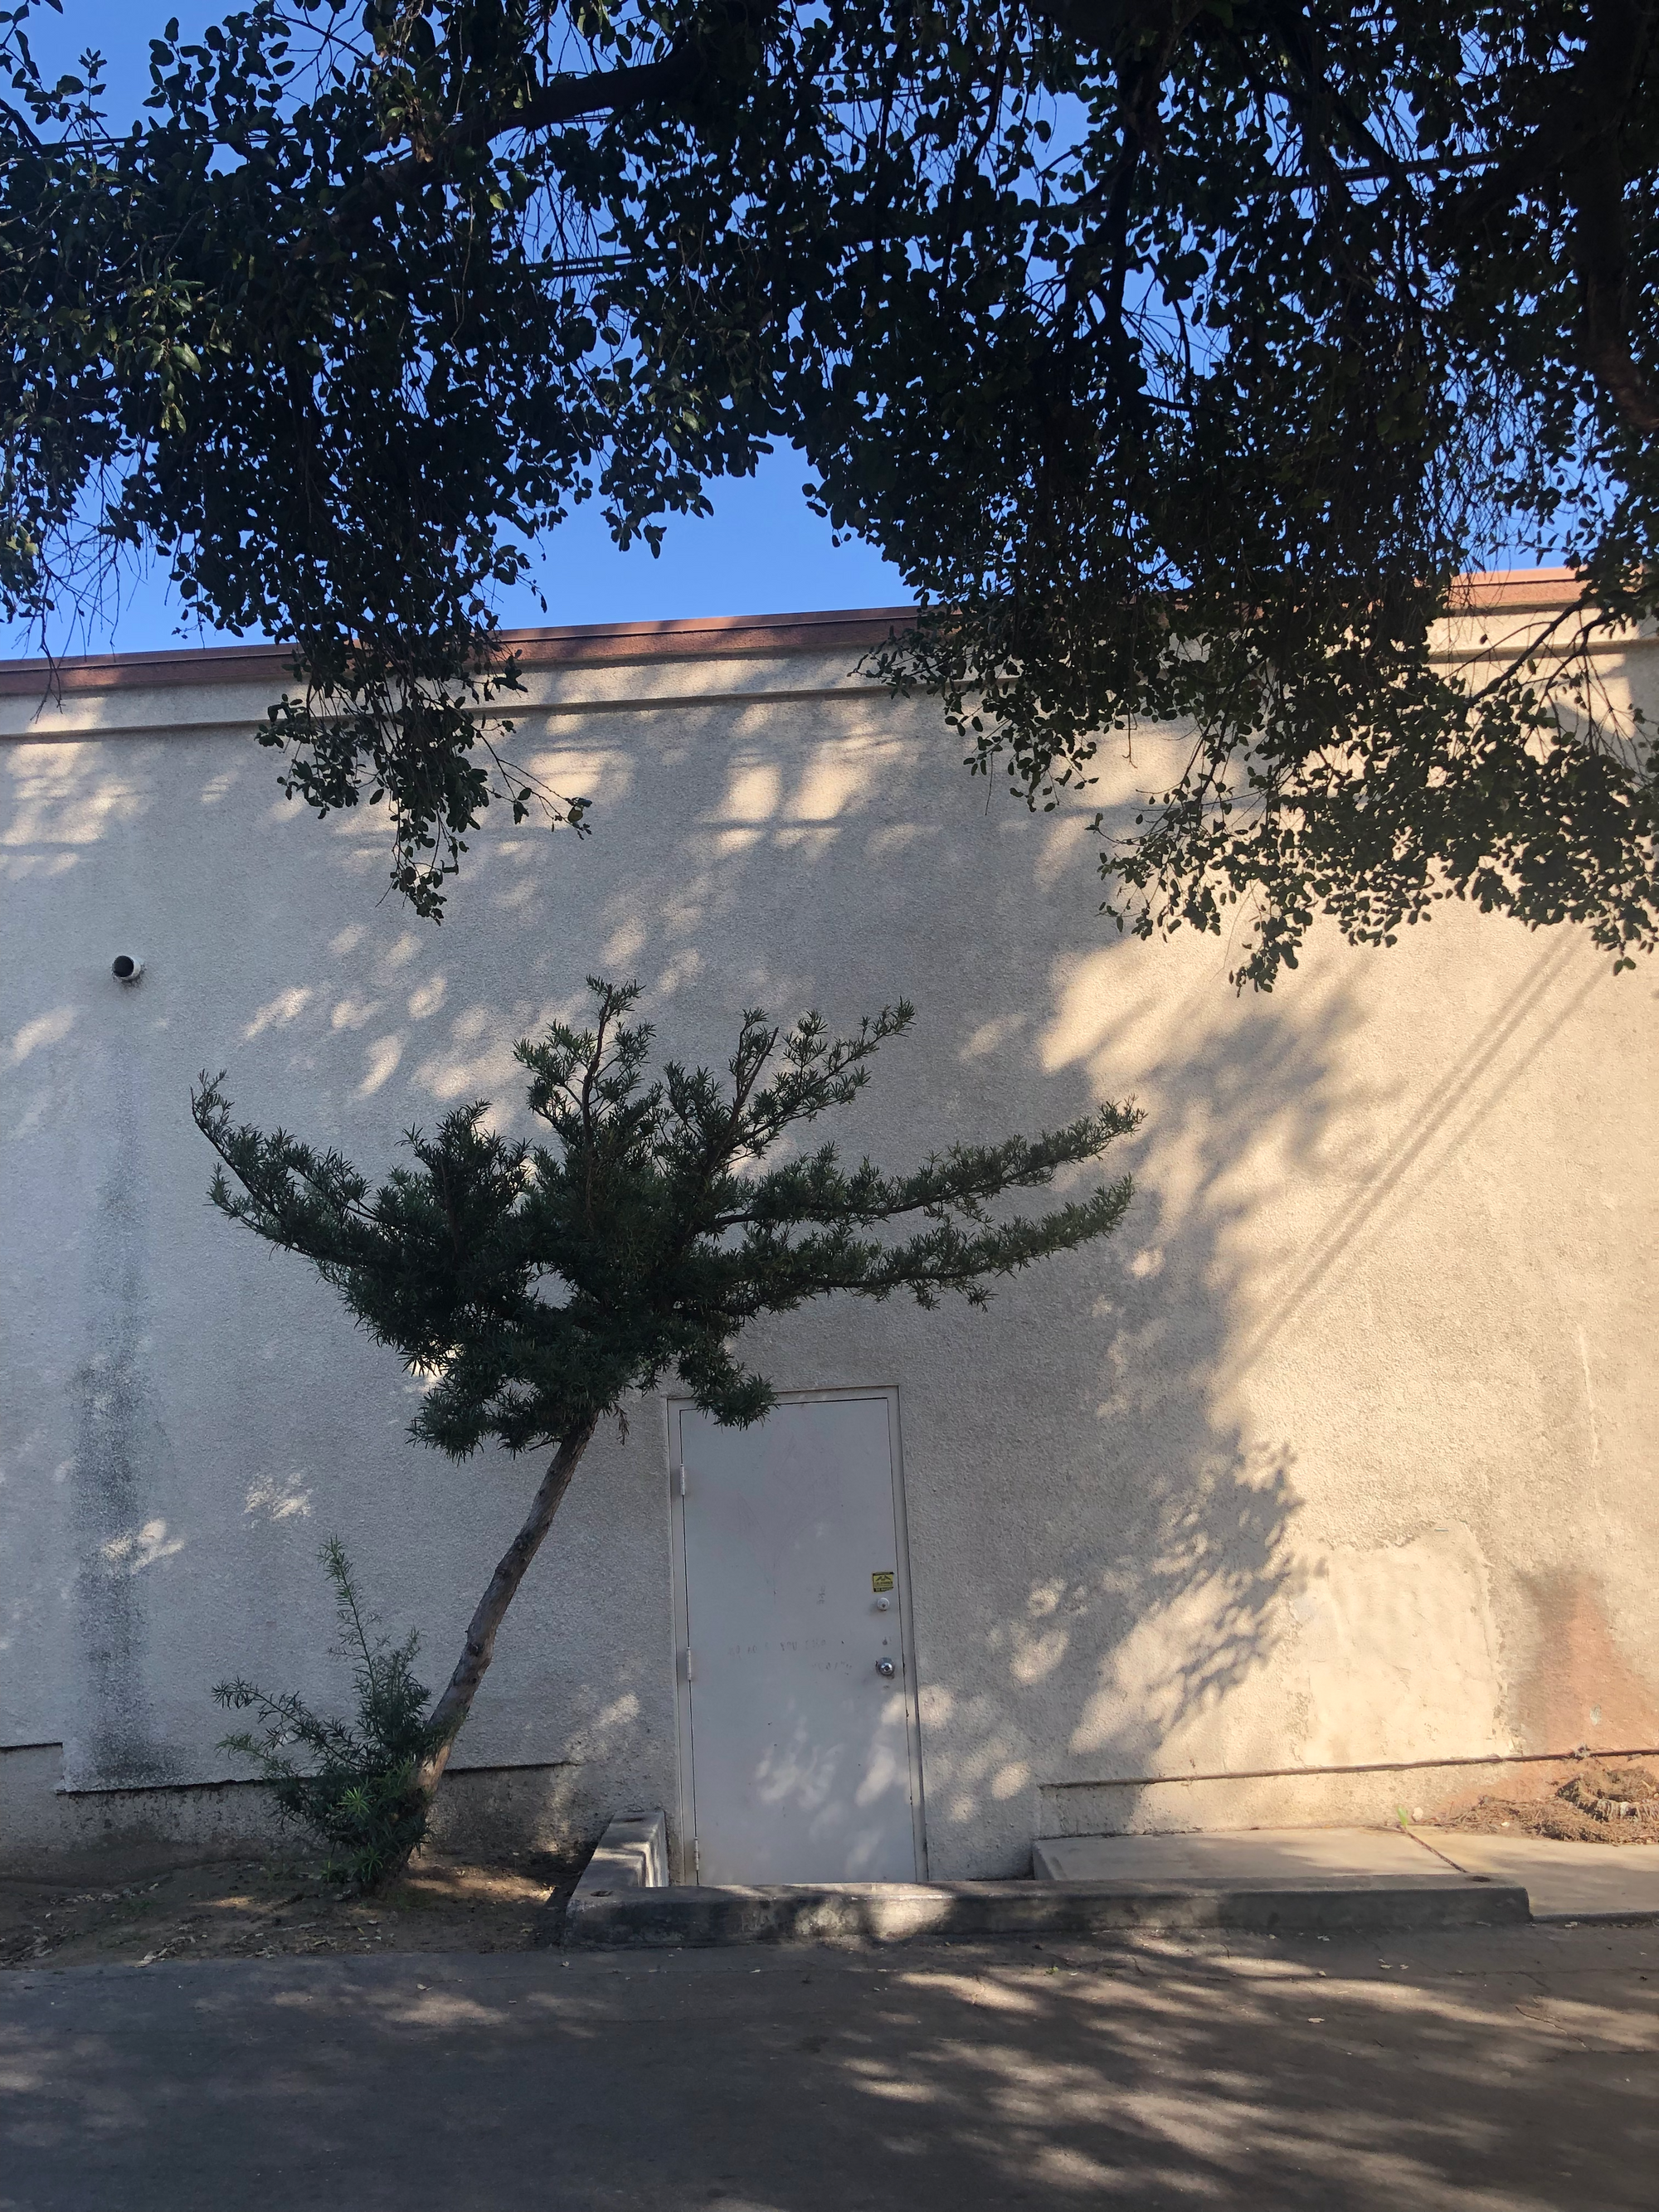 photo of an old white one-story building in front of a pale gray road, a tree looming overhead, entangled with power lines, and a smaller tree leaning at a 45-degree angle over a white metal door. taken near the robledo art, strike! headquarters, february 2023, on a somewhat sunny day as dusk approaches.